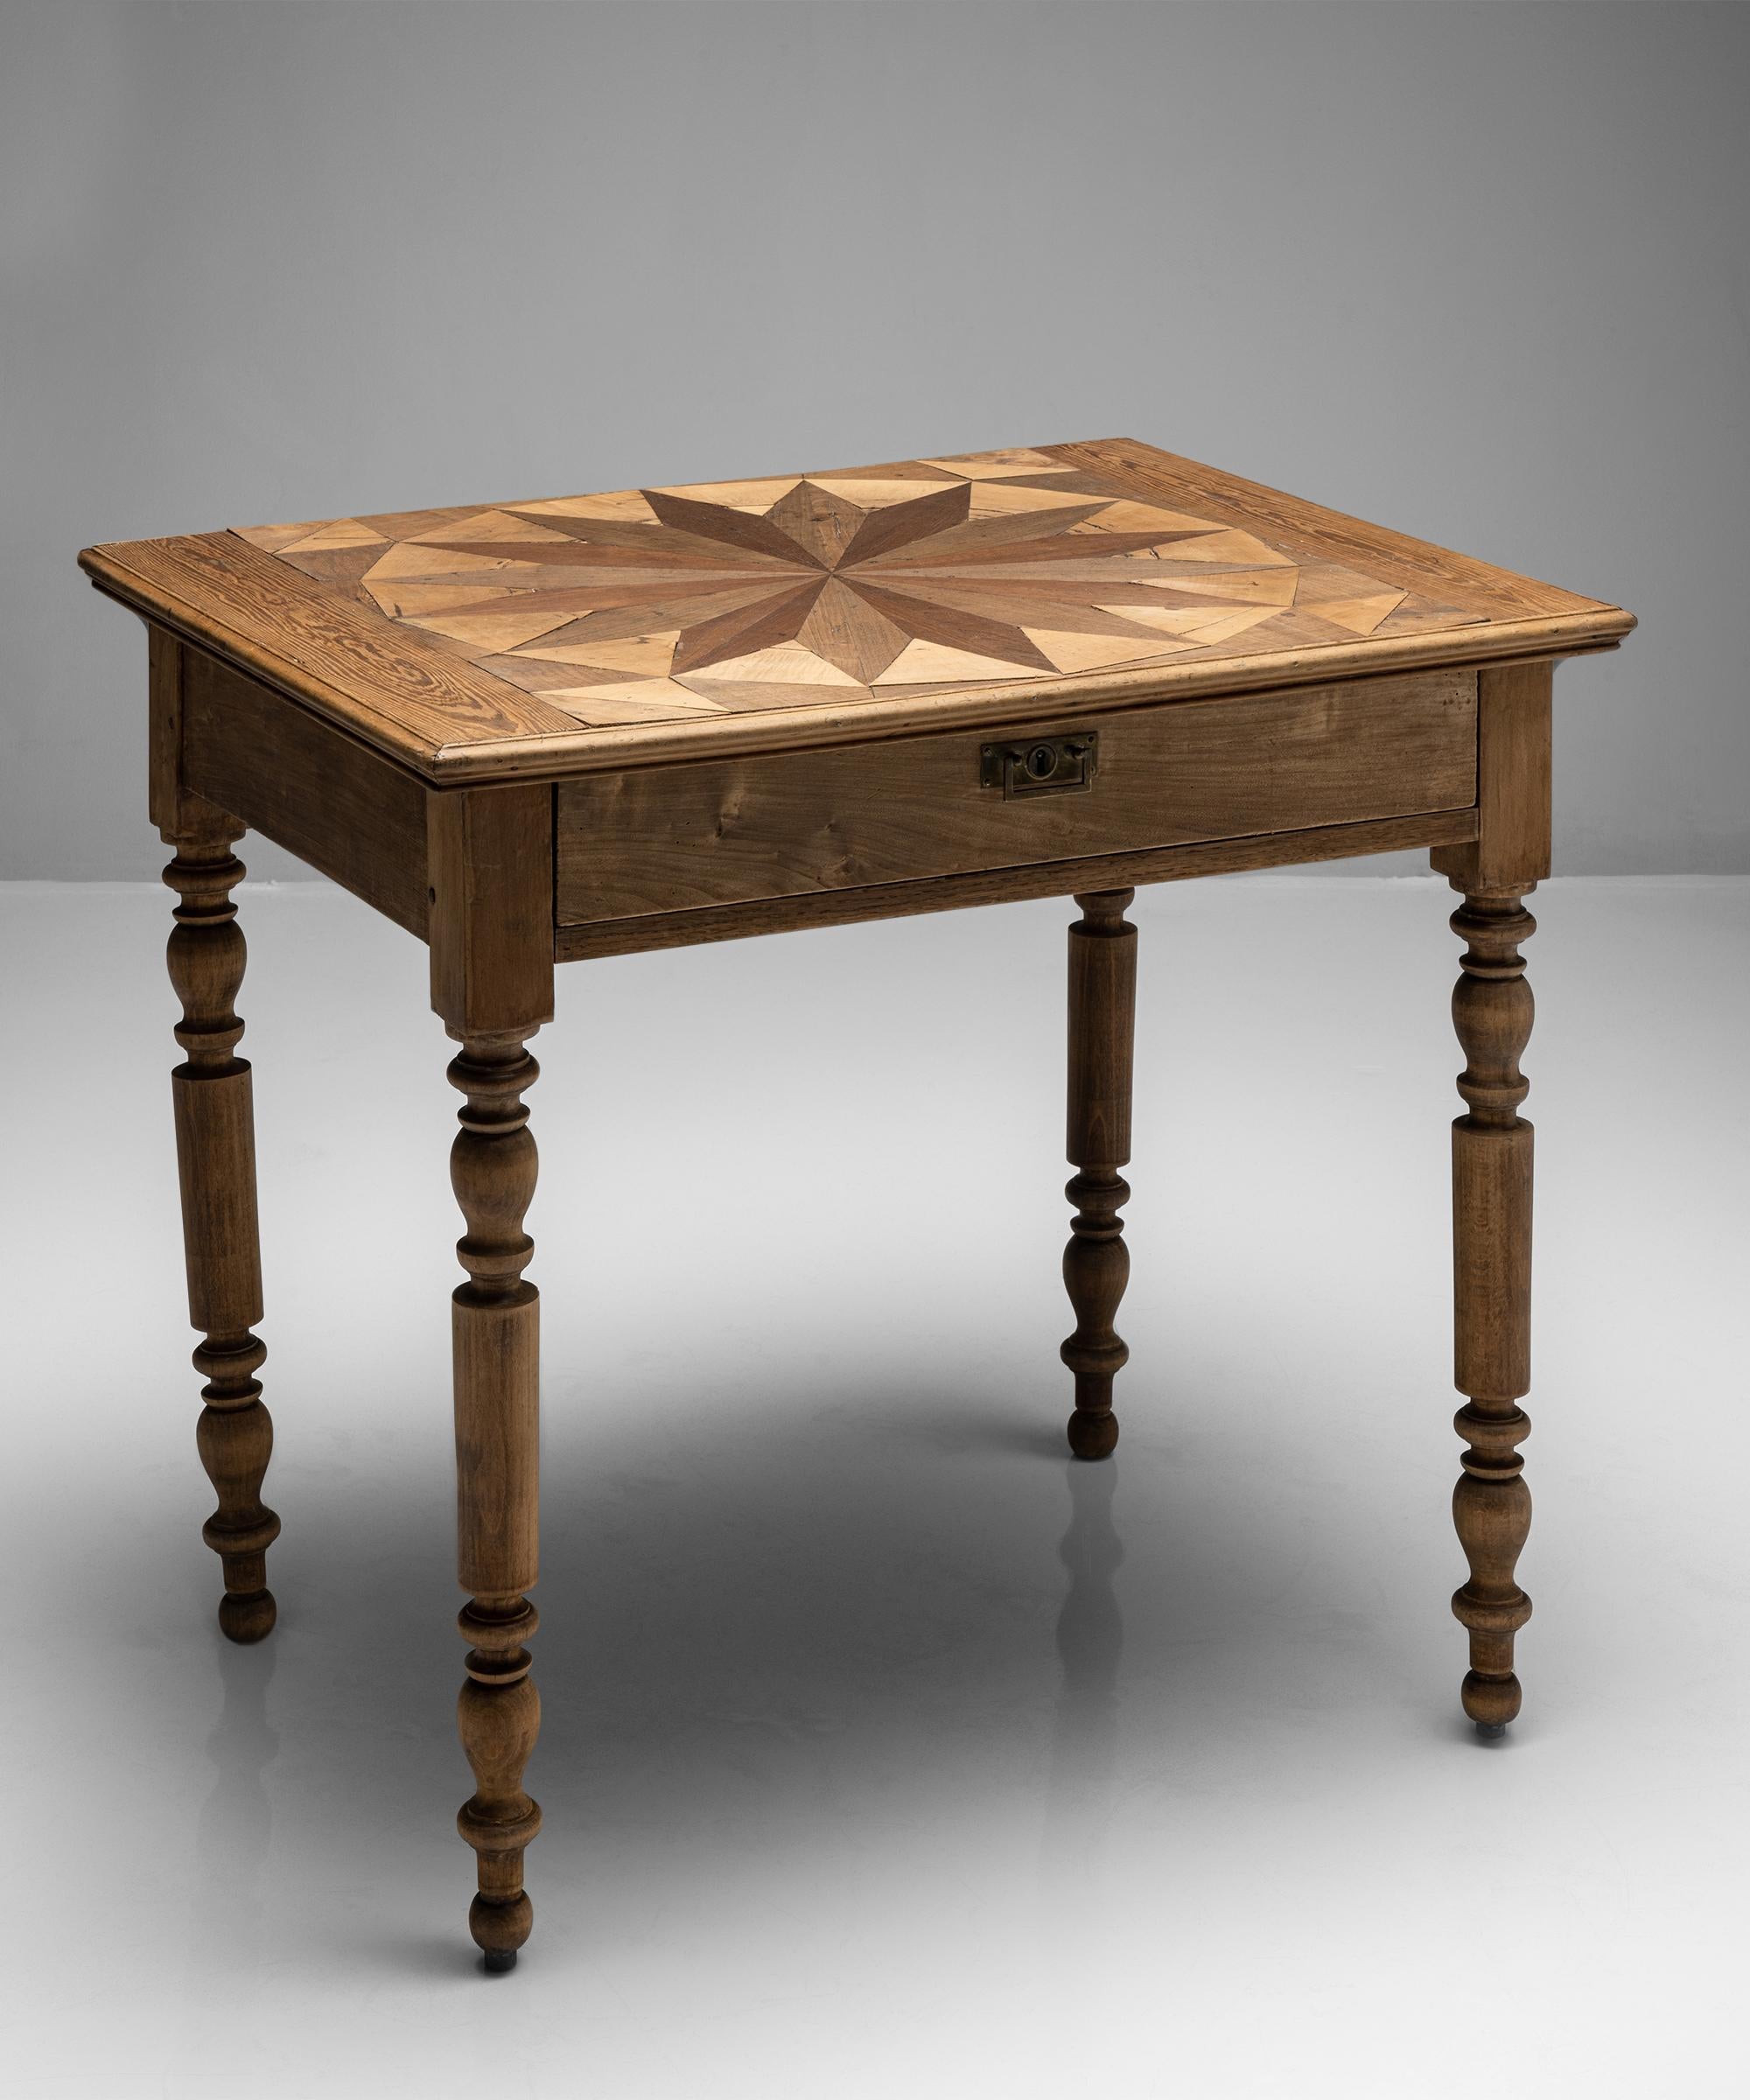 Sunburst side table

France circa 1880

Top is inlaid with various specimens of wood in the shape of a sunburst. with single drawer.

Measures: 32.5” W x 25.5” D x 29” H.

$ 4,800.

 